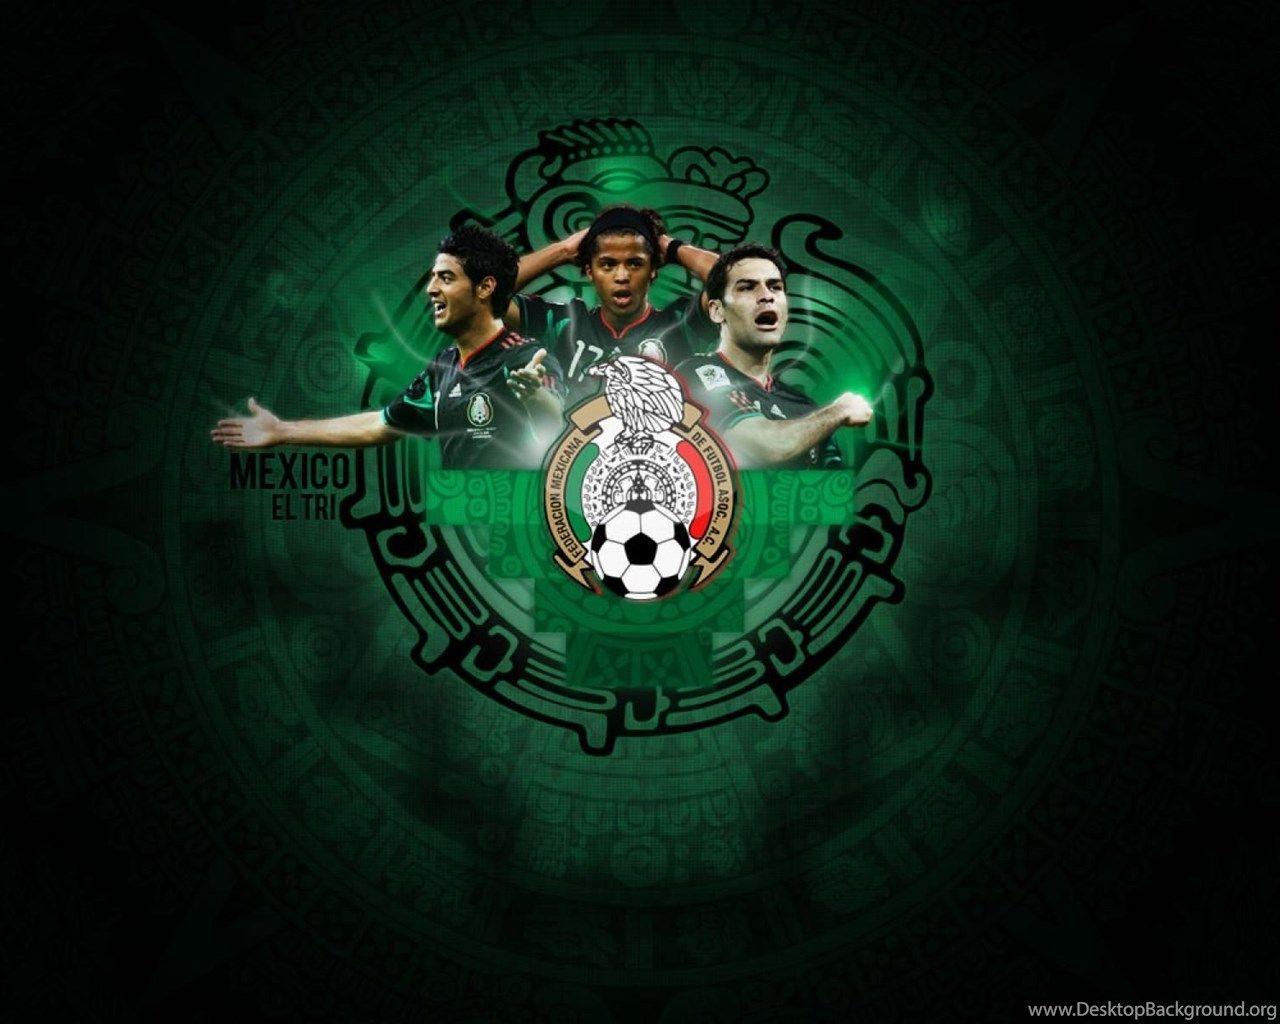 Mexico El Tri World Cup Exclusive 2K Wallpapers Desk 4K Backgrounds